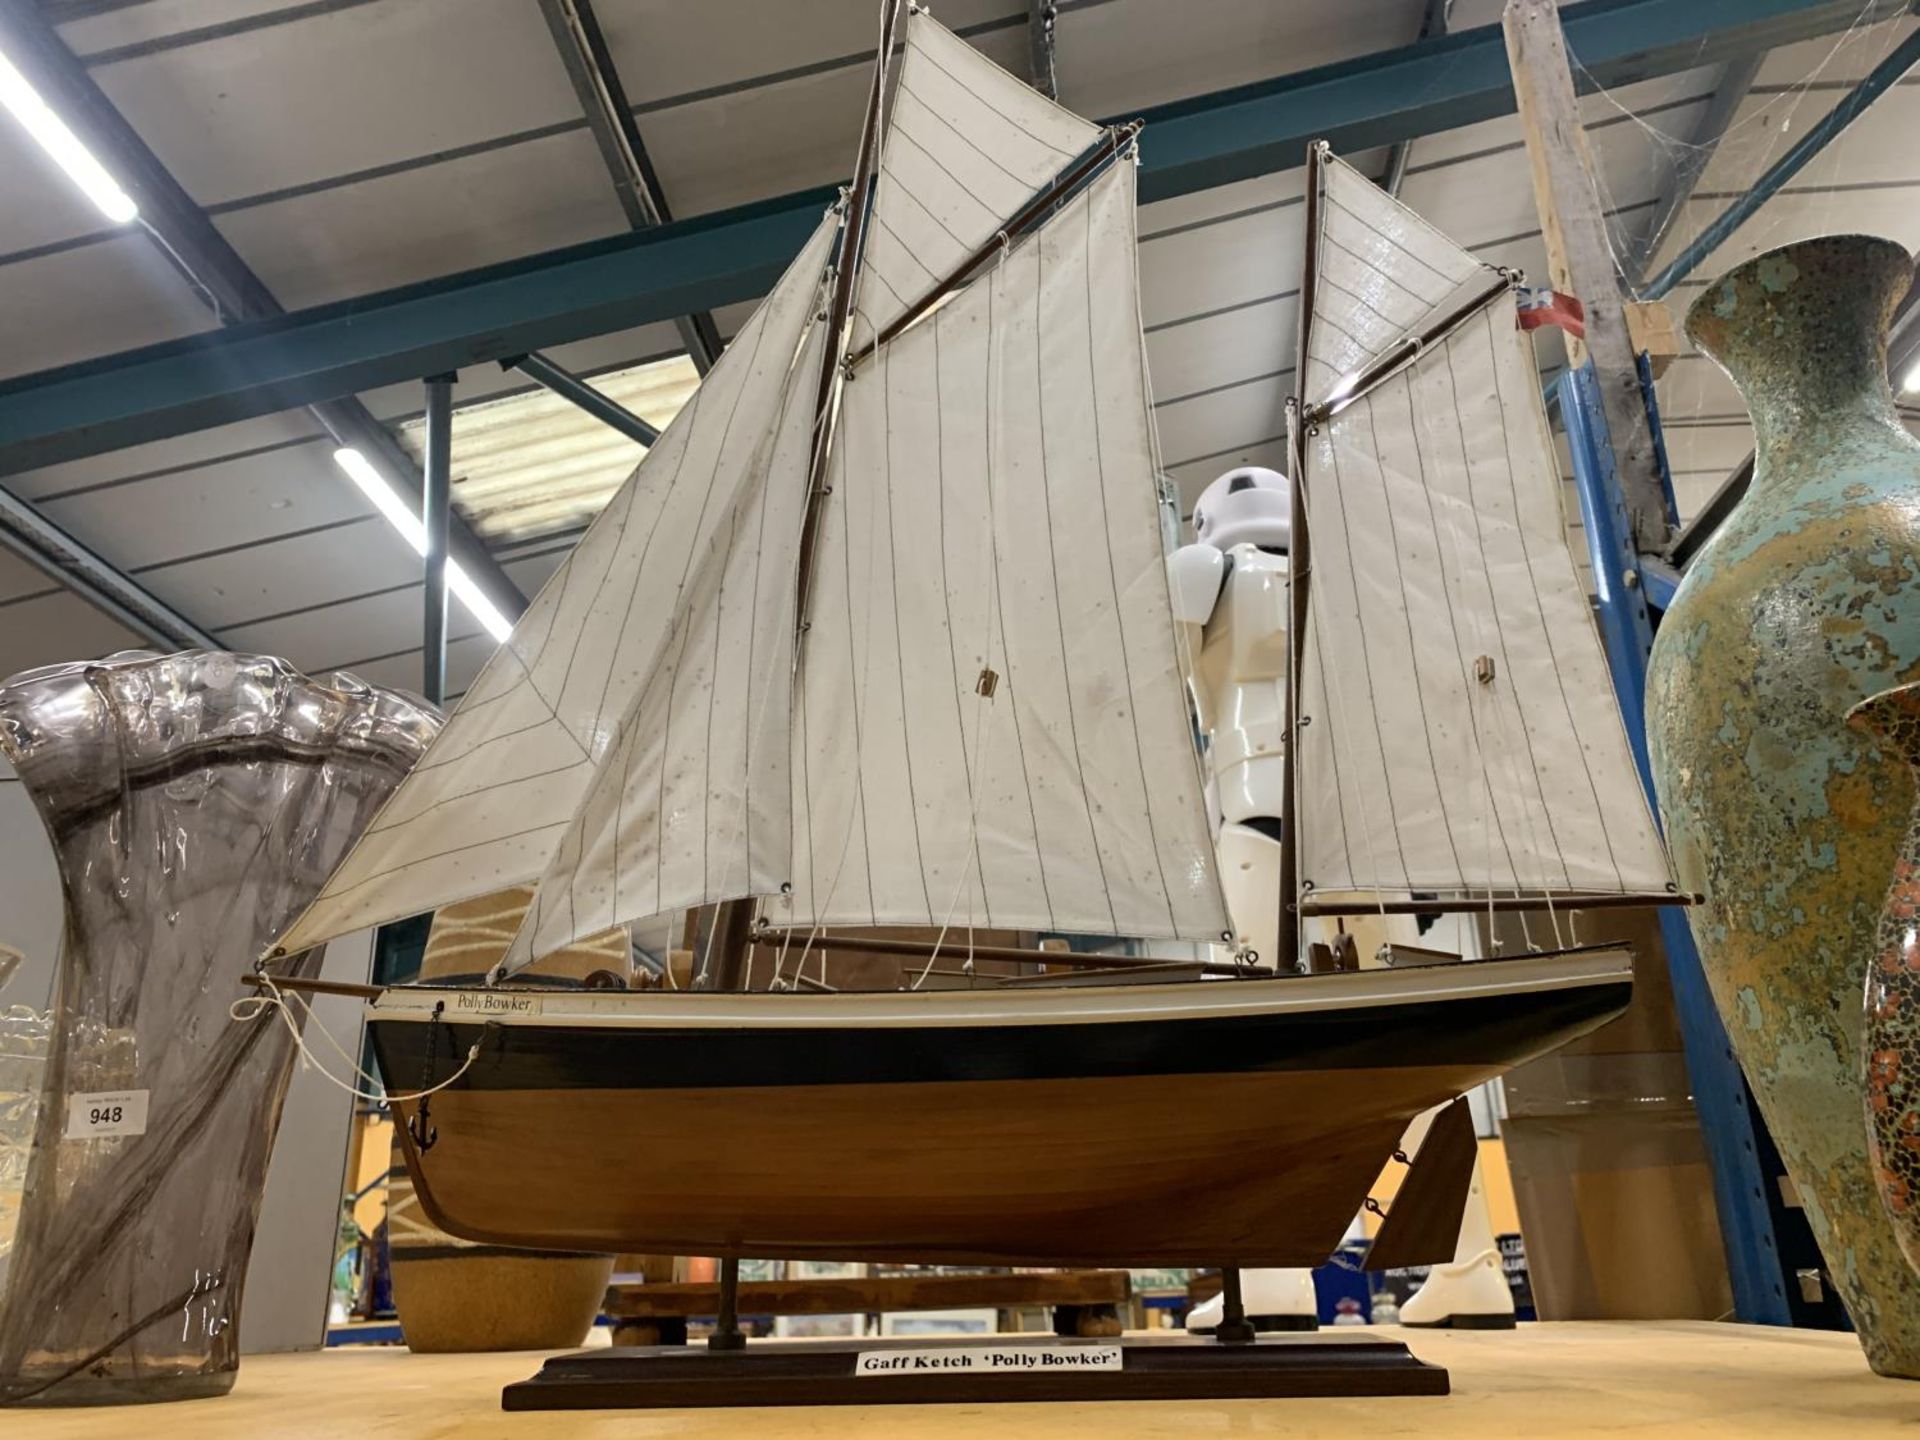 A WOODEN MODEL OF A SAILING BOAT CALLED 'POLLY BOWKER' LENGTH 68CM